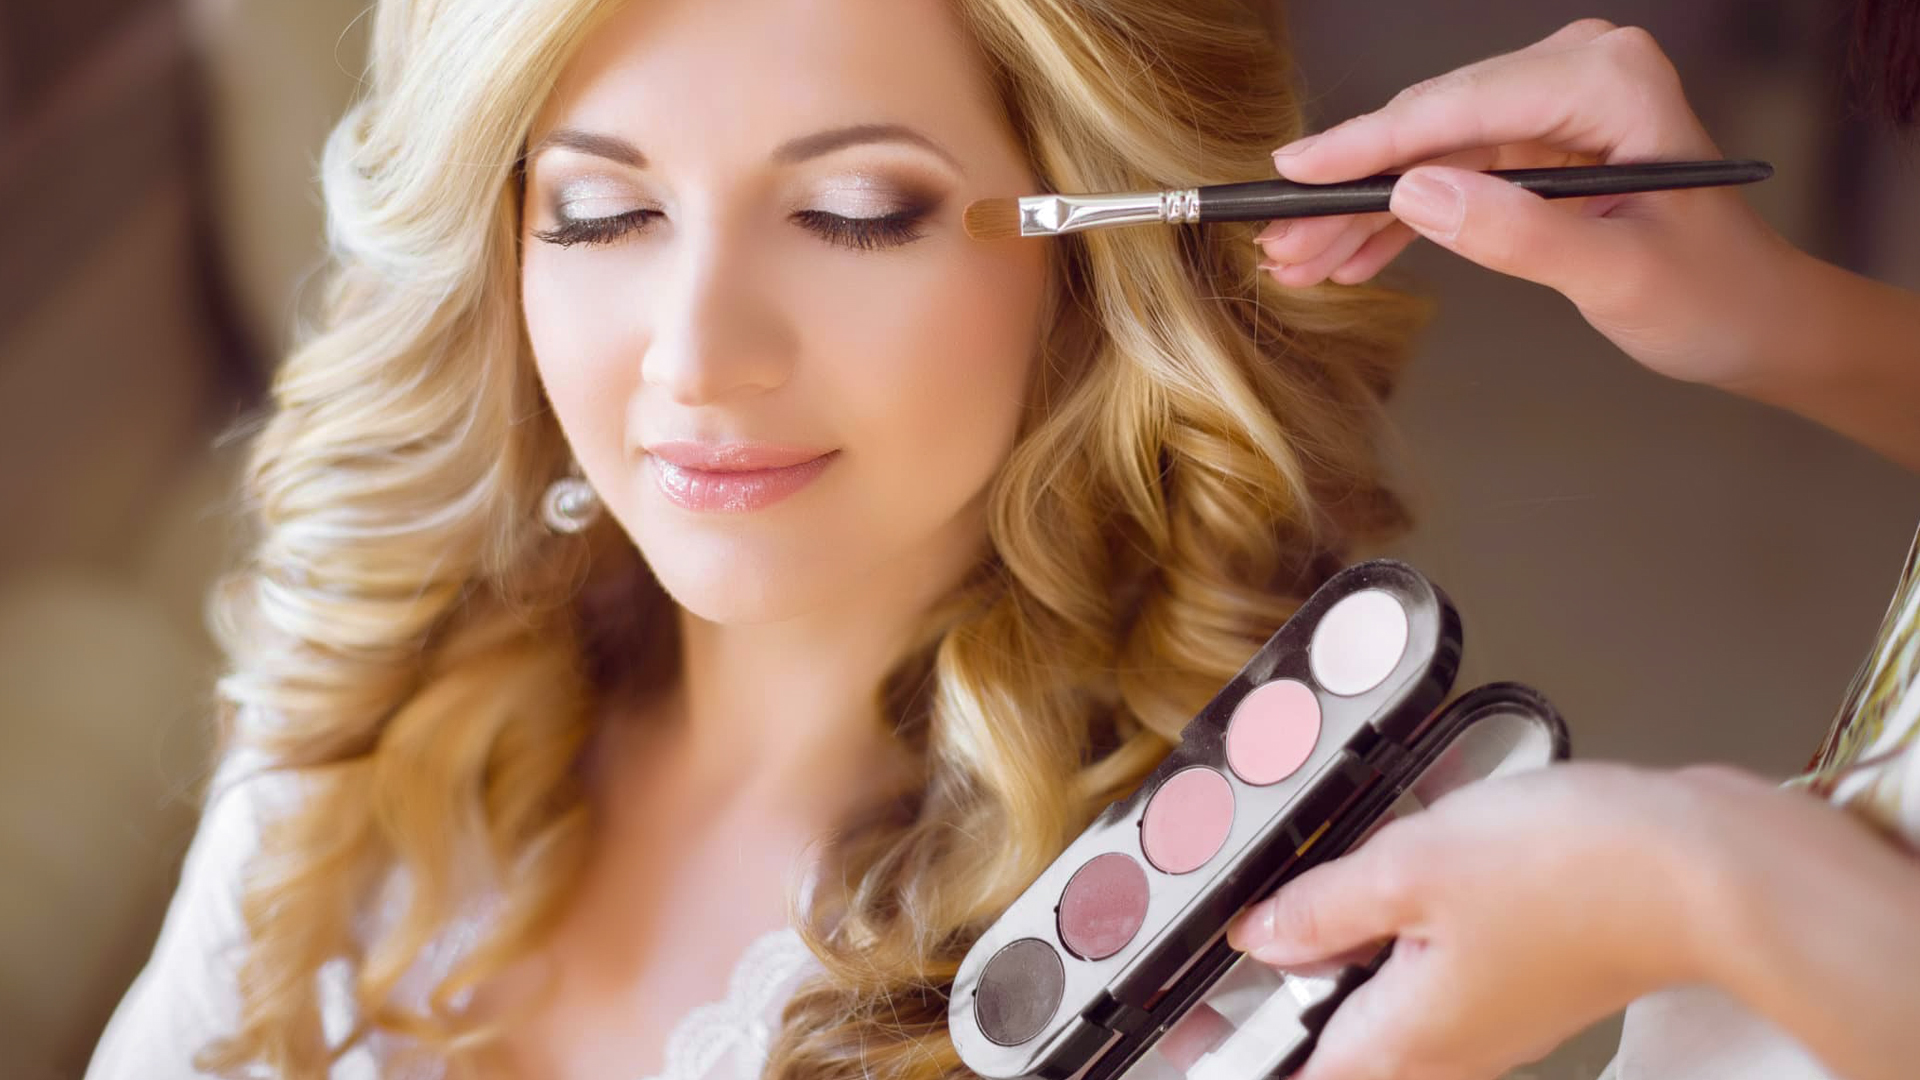 How To Plan And Start A Wedding Beauty Regimen - The Ultimate Beauty Checklist For Brides-To-Be